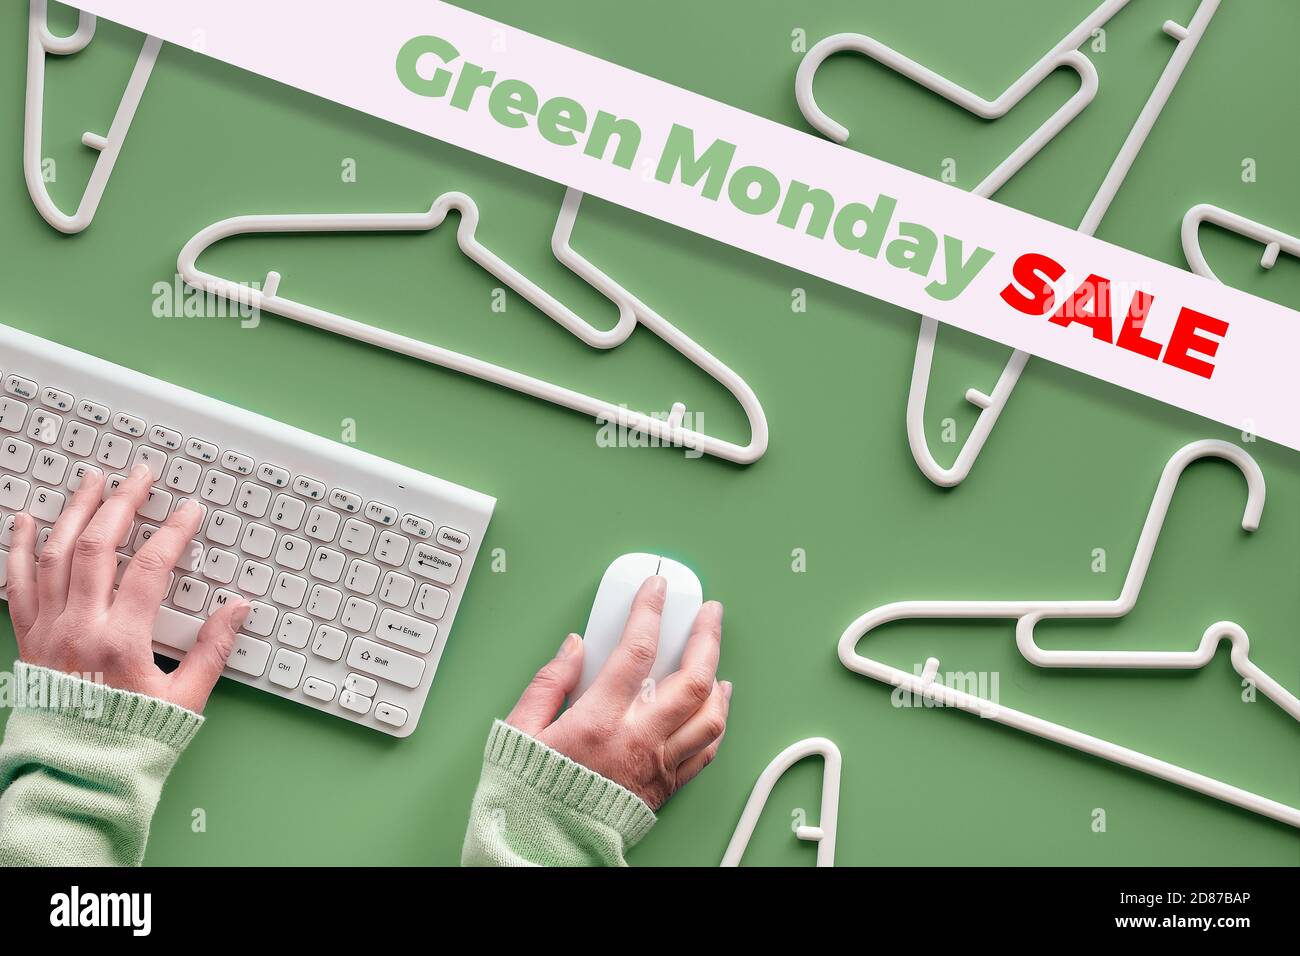 Green Monday sale text on green background with plastic hangers, hands on keyboard and computer mouse Stock Photo